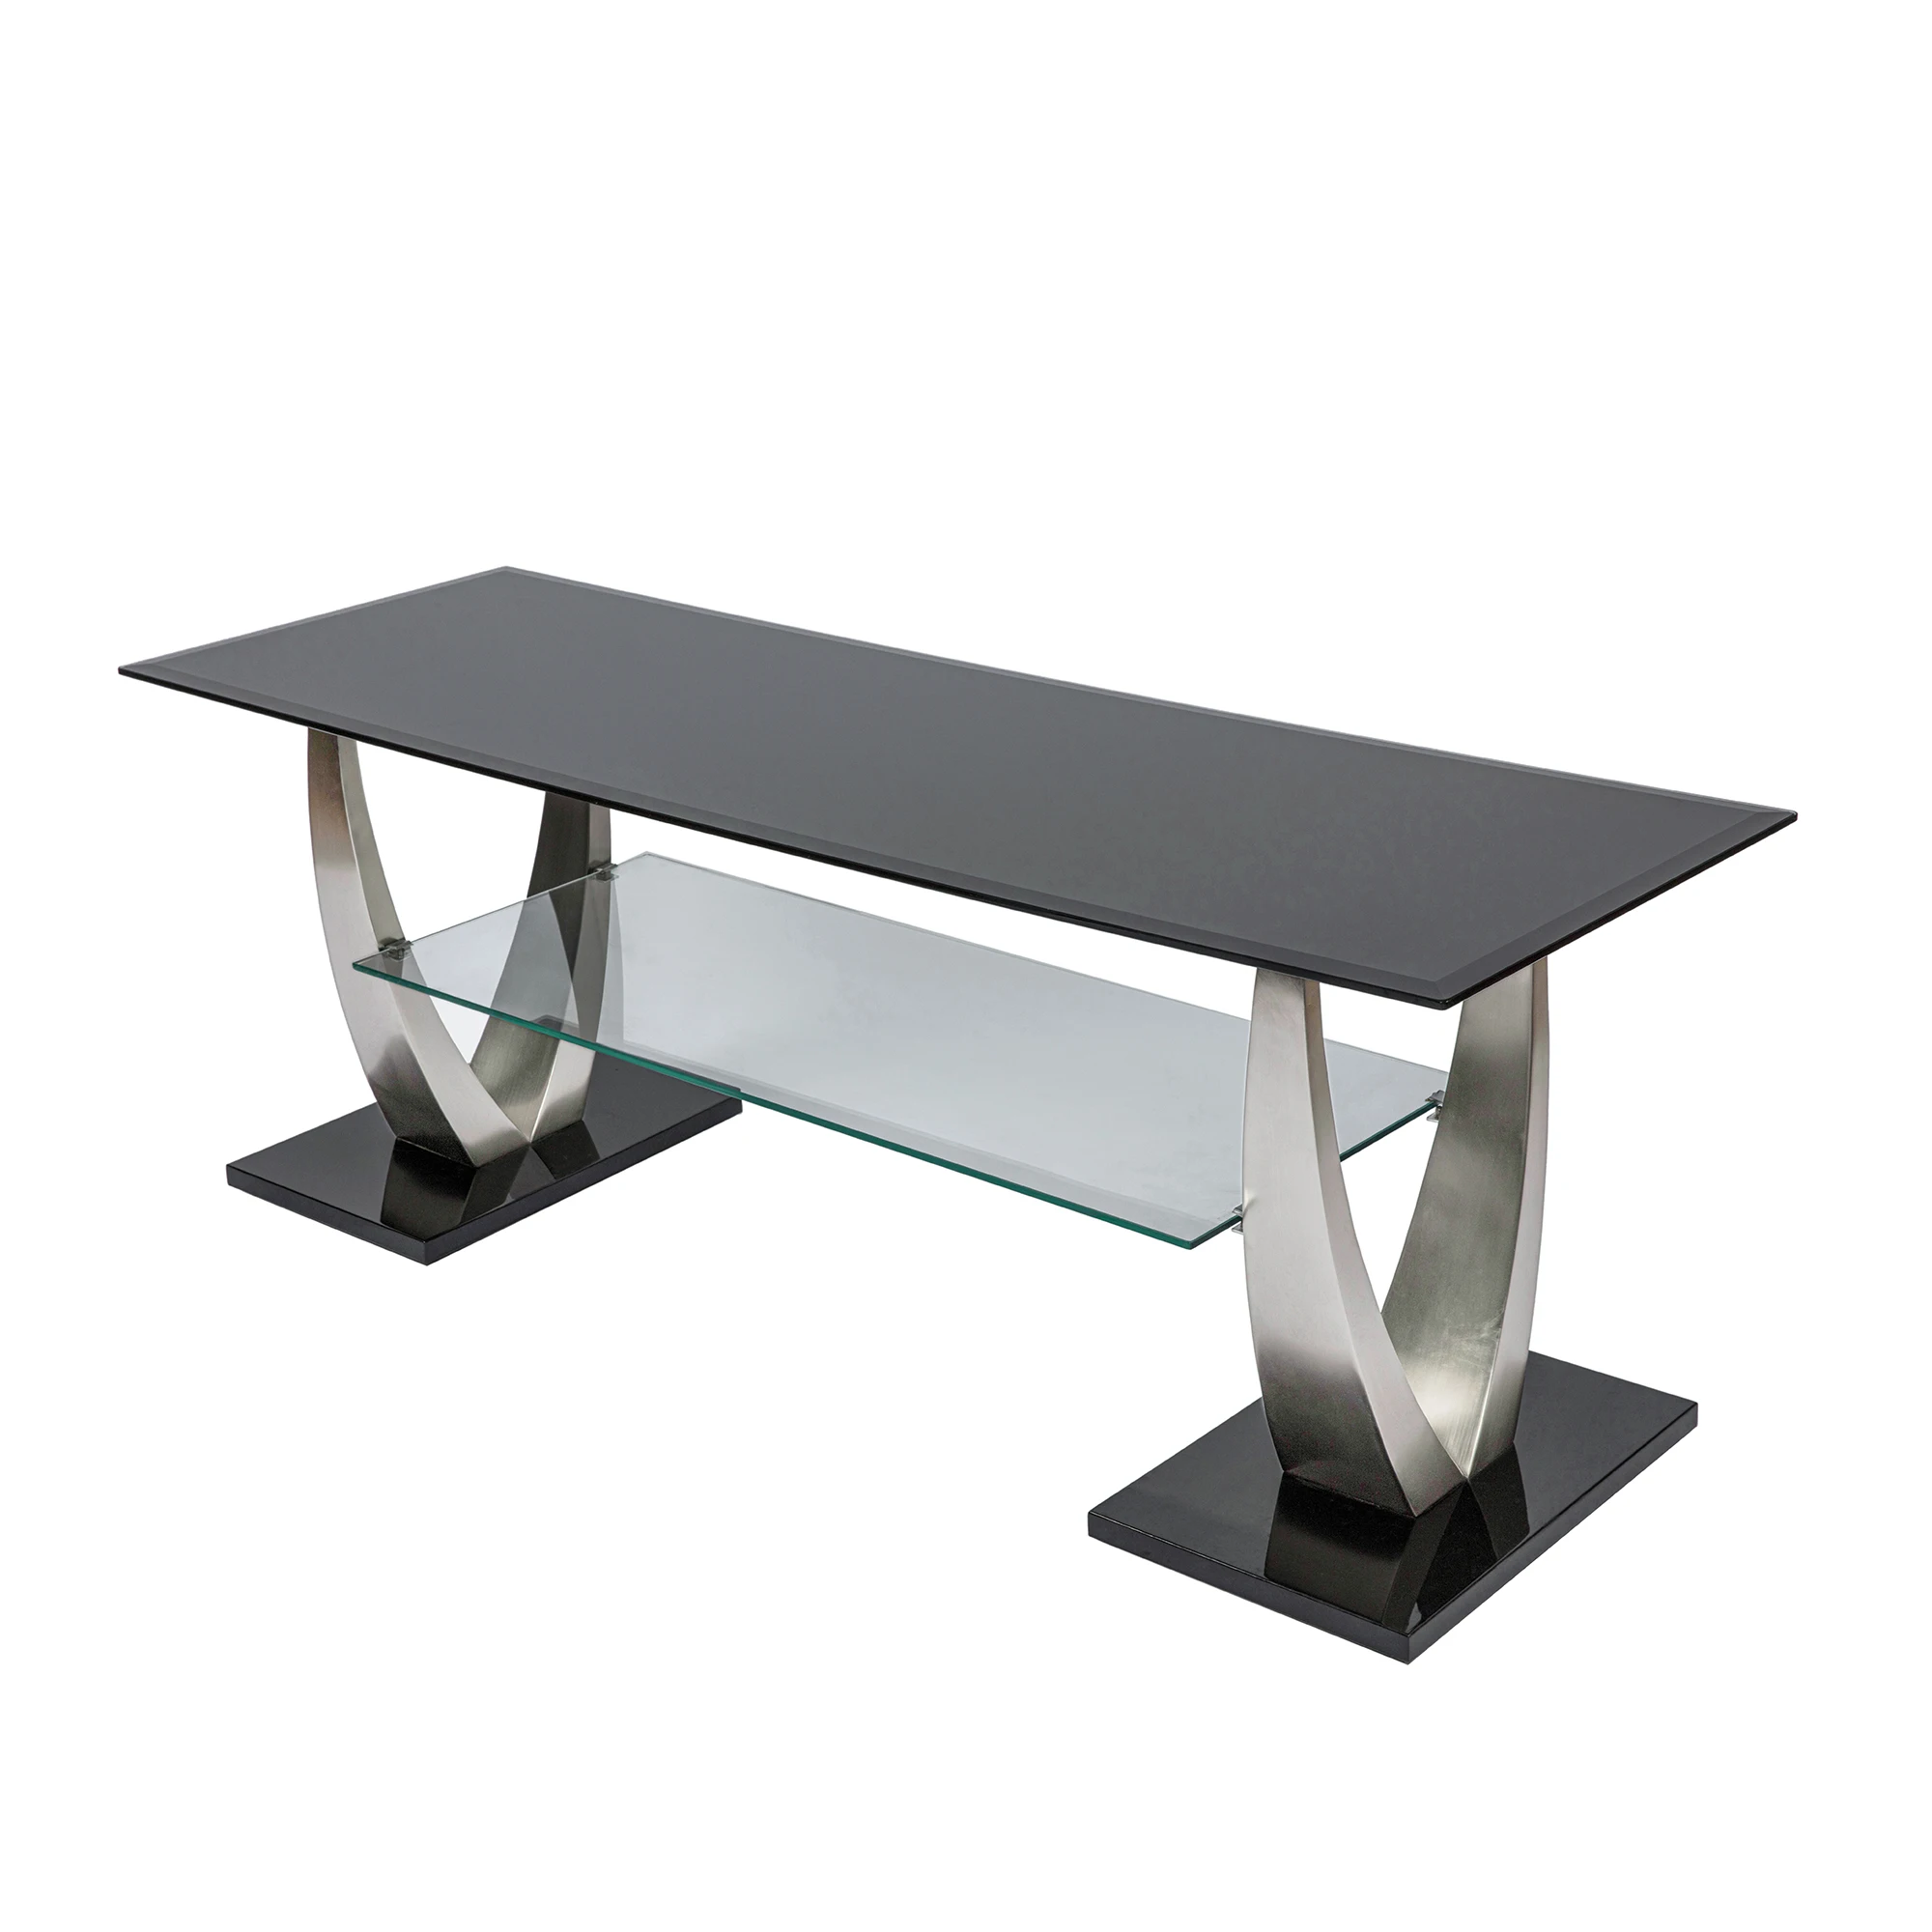 Modern Classic Simple Design Home Living Room Stylish Furniture Black Glass Top Steel Frame Tv Table Stands